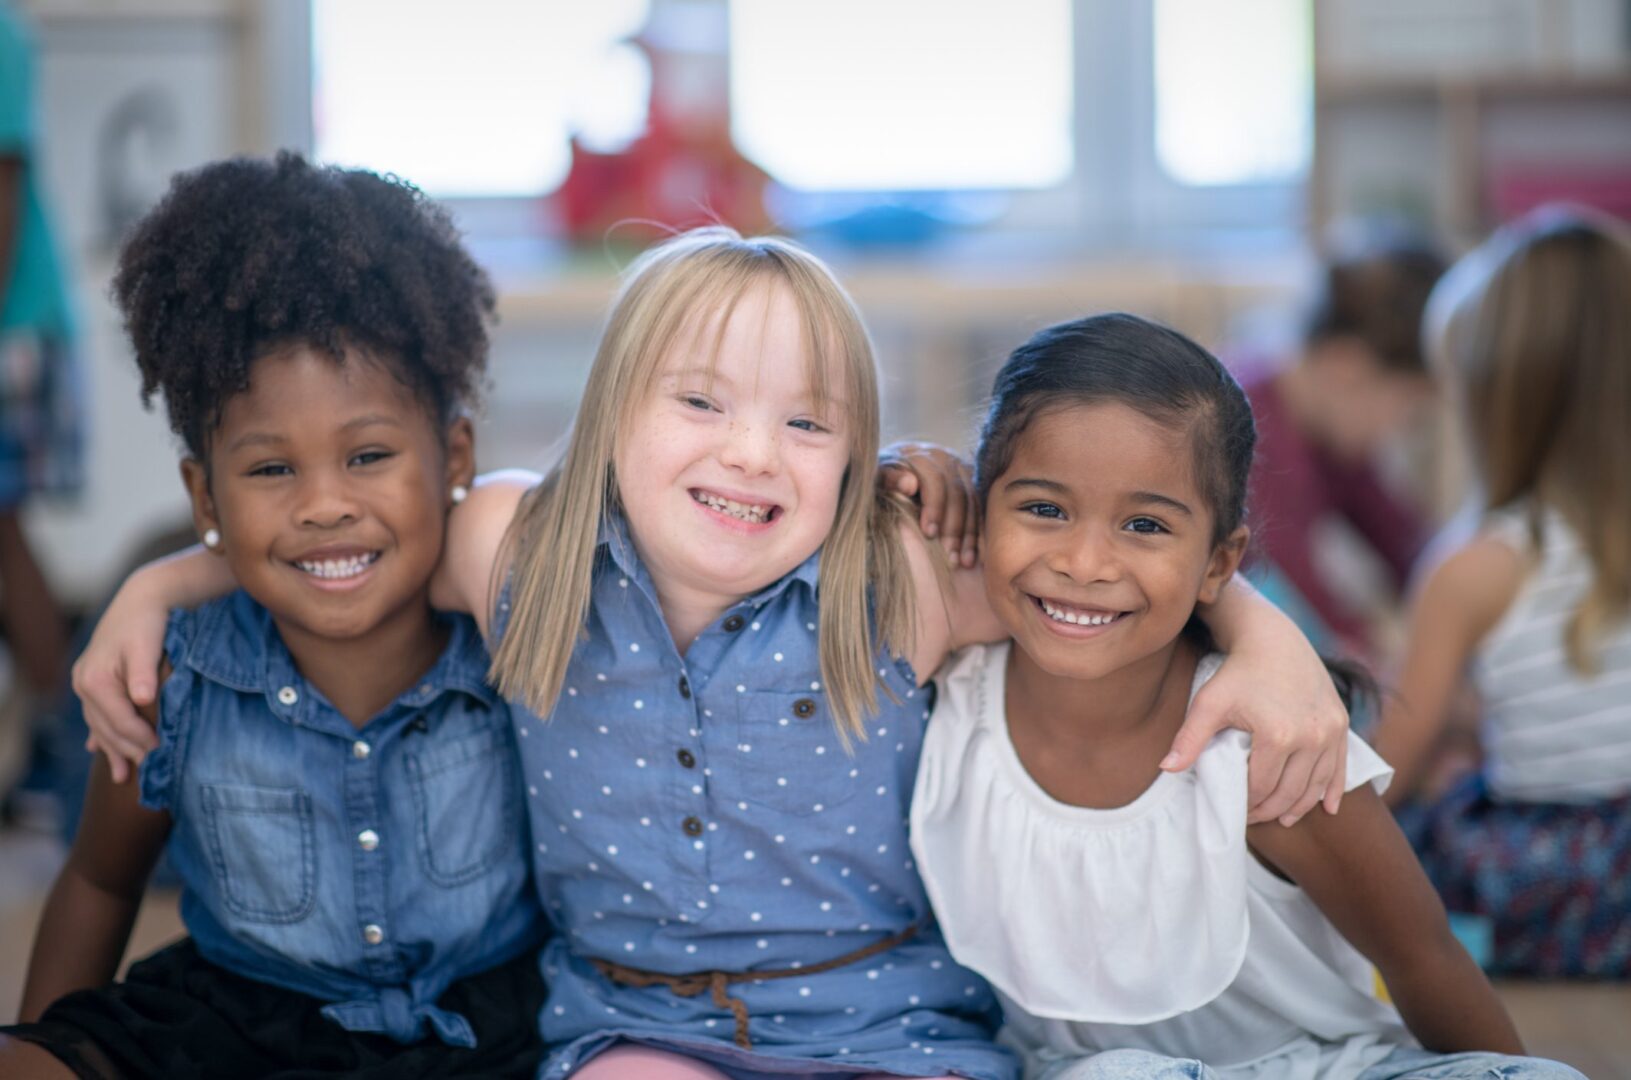 Three multi ethnic preschool girls in their classroom. One of the girls (in the middle) is of Caucasian ethnicity and has Down syndrome. The other girls are of African and mixed race ethnicity.